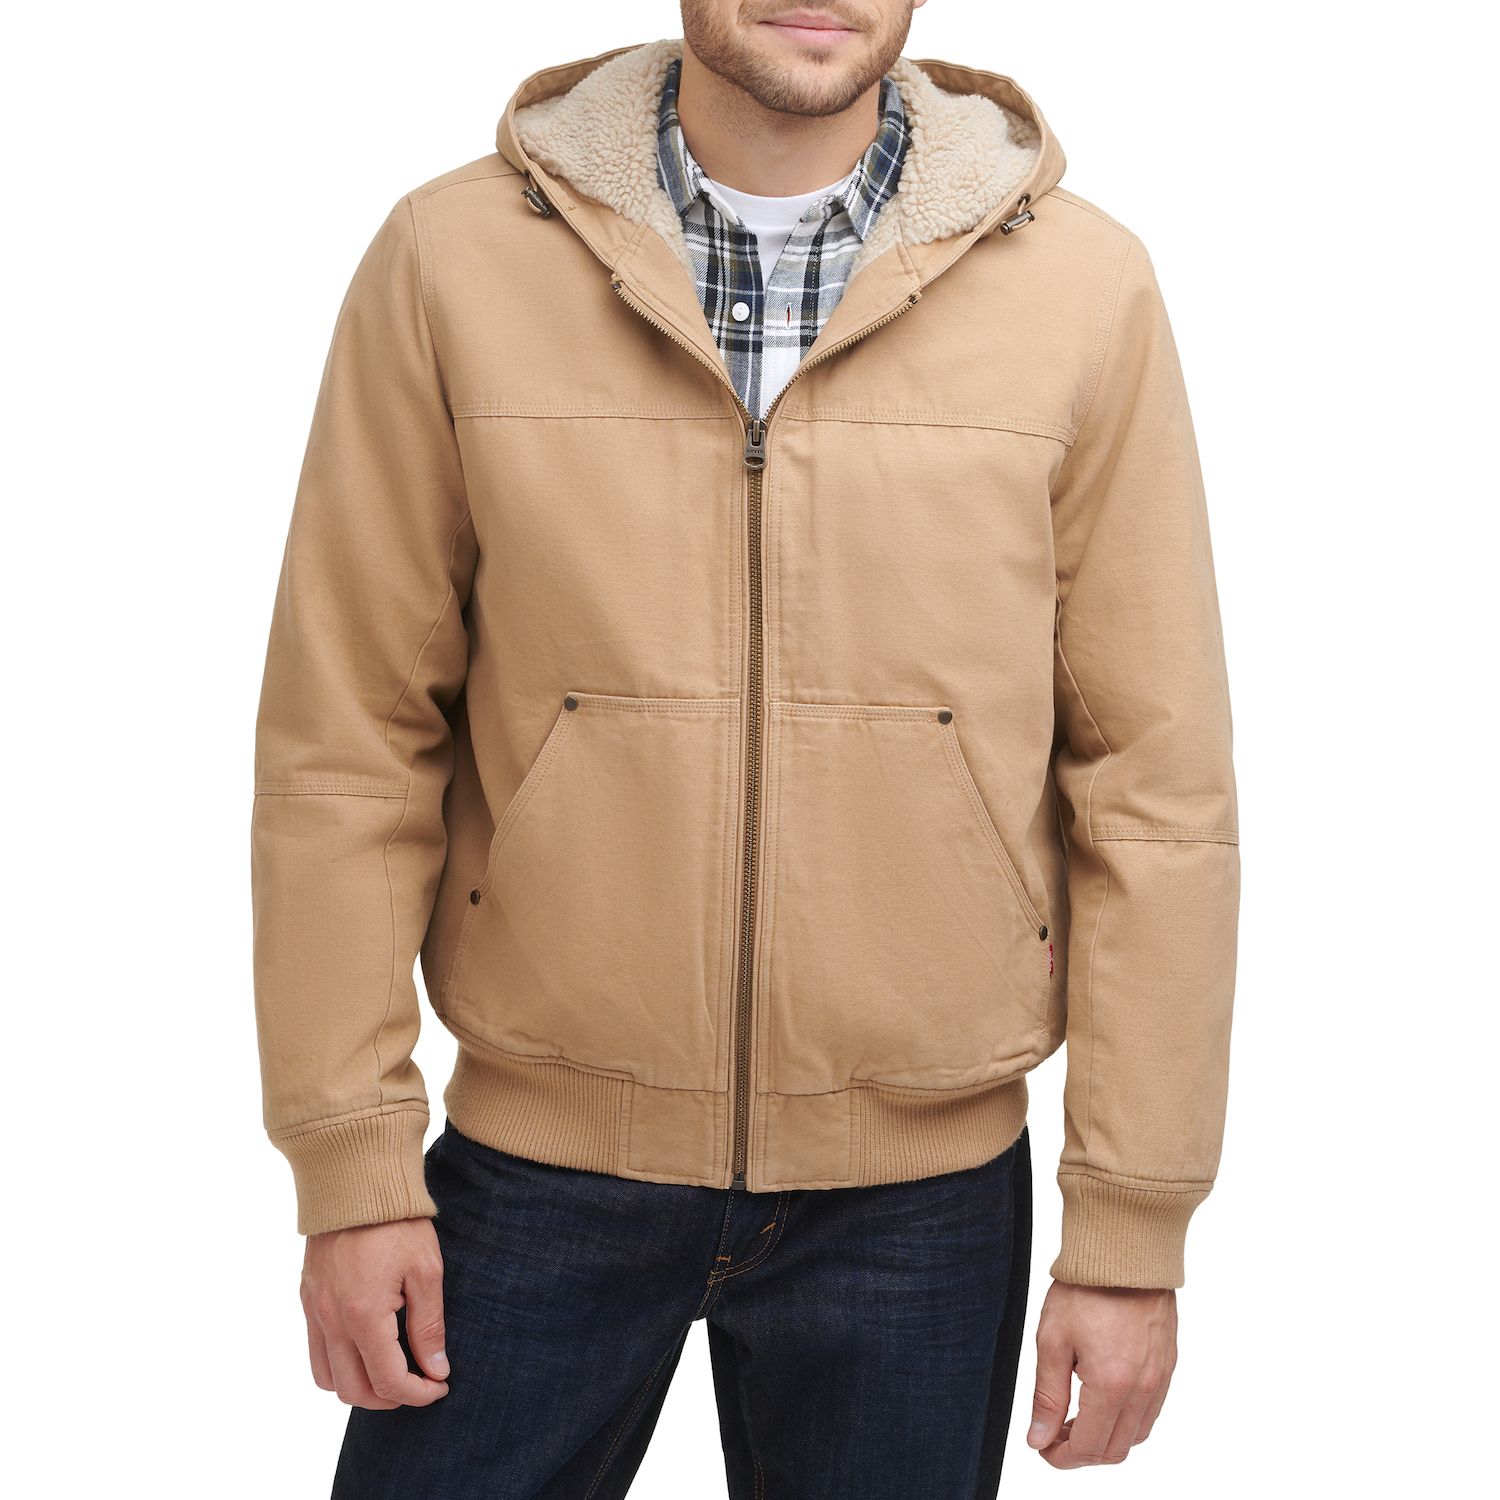 Image for Levi's Men's Canvas Workwear Sherpa-Lined Hooded Bomber at Kohl's.